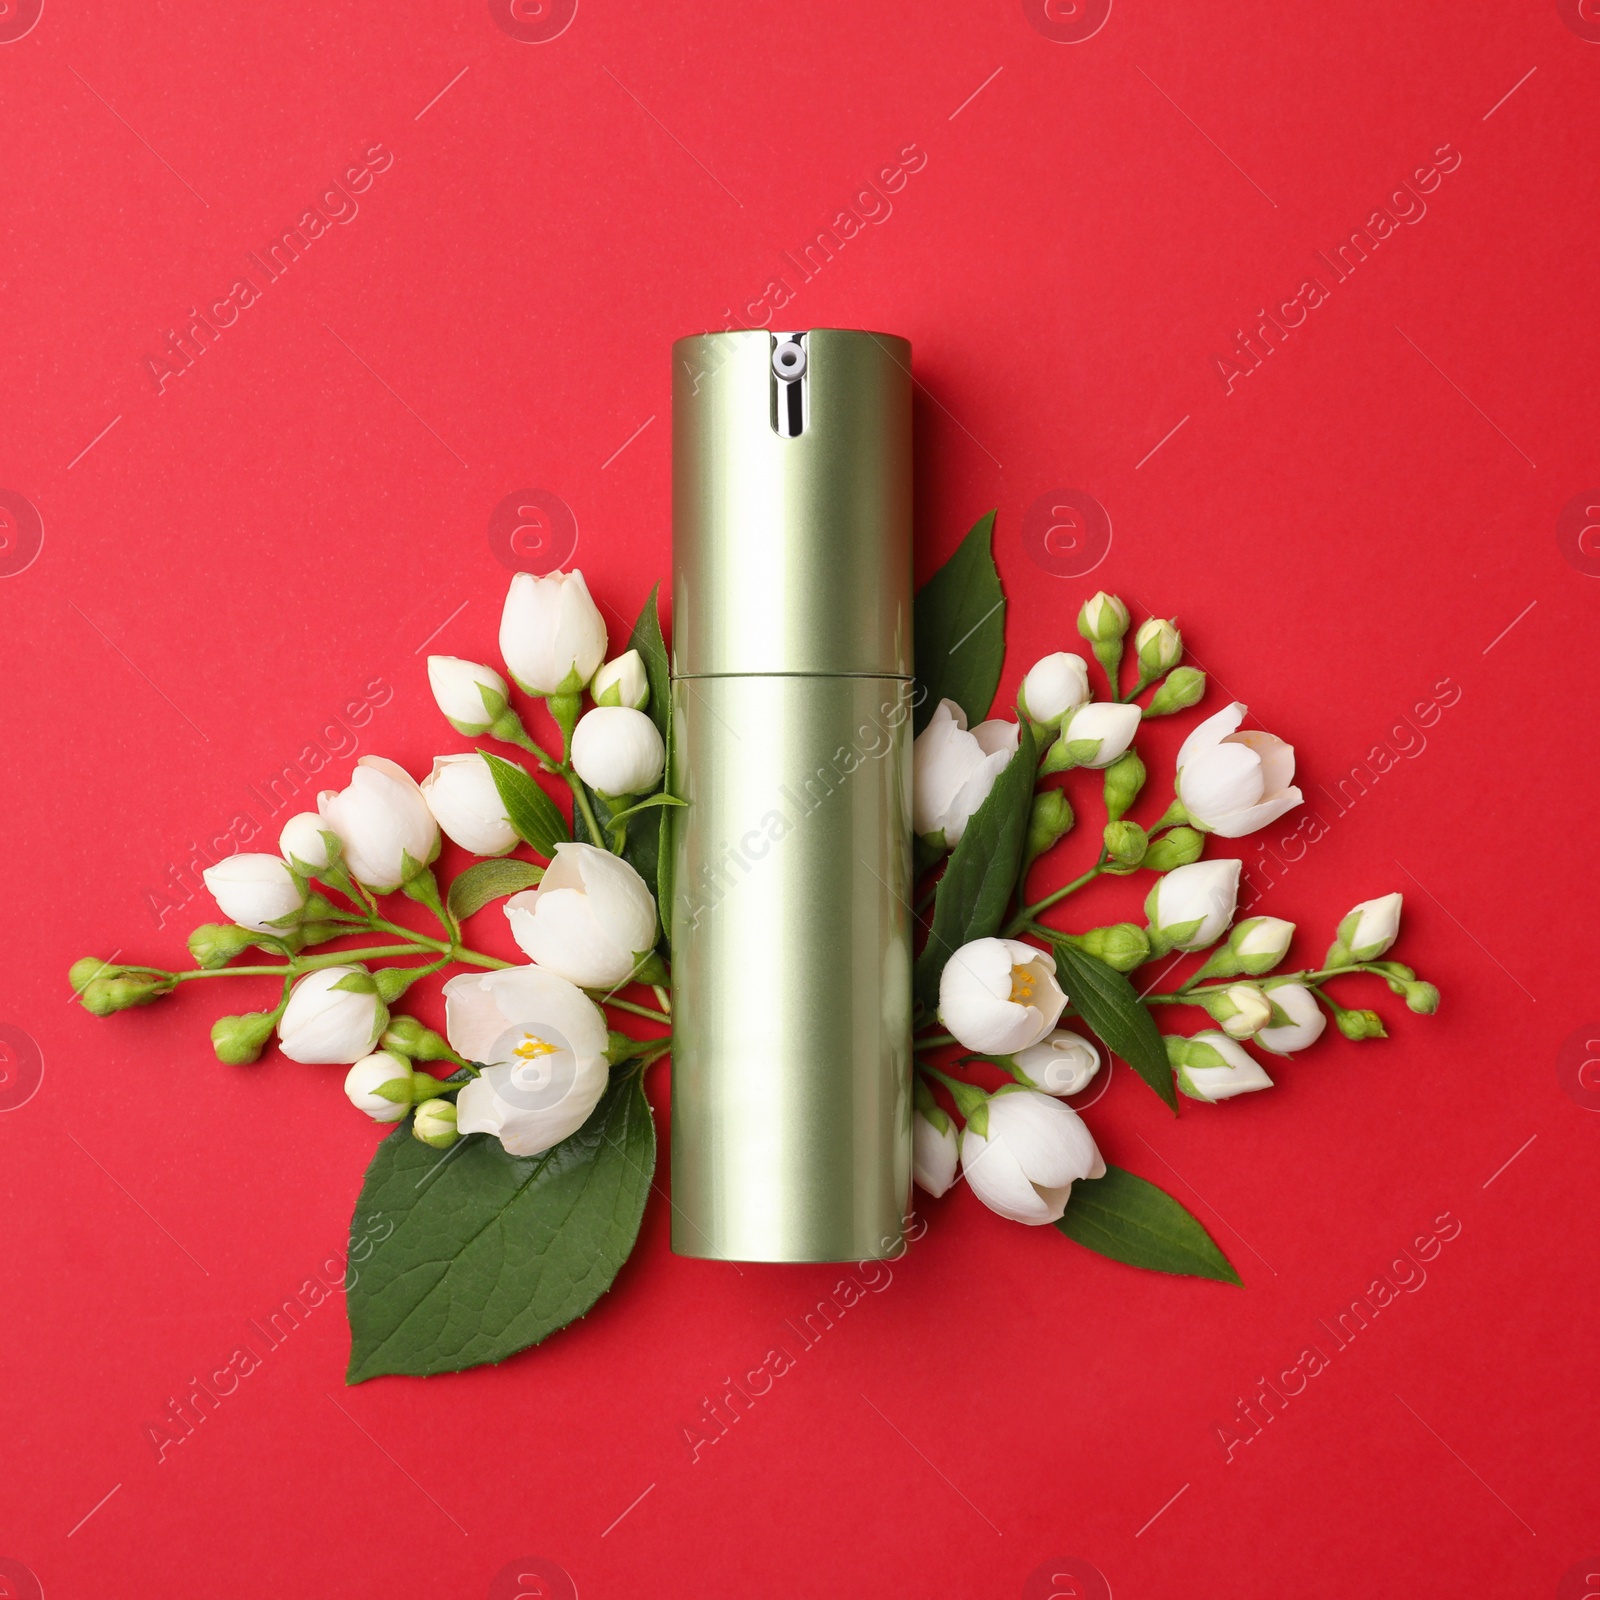 Photo of Bottle of cosmetic product and flowers on red background, flat lay